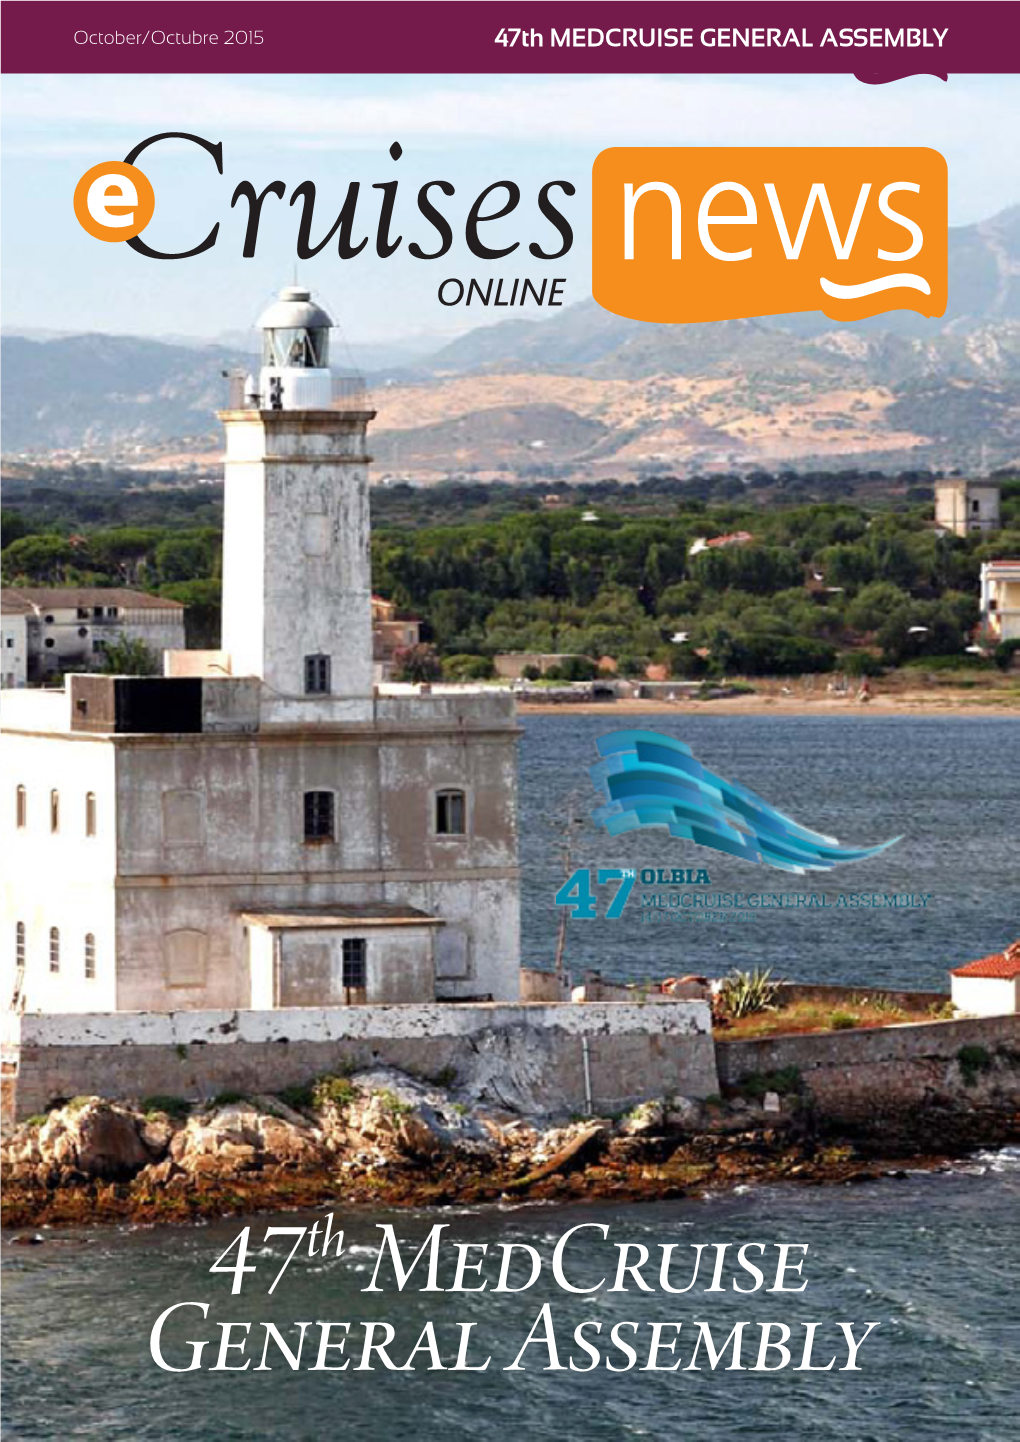 47Th MEDCRUISE GENERAL ASSEMBLY Ecruises News ONLINE